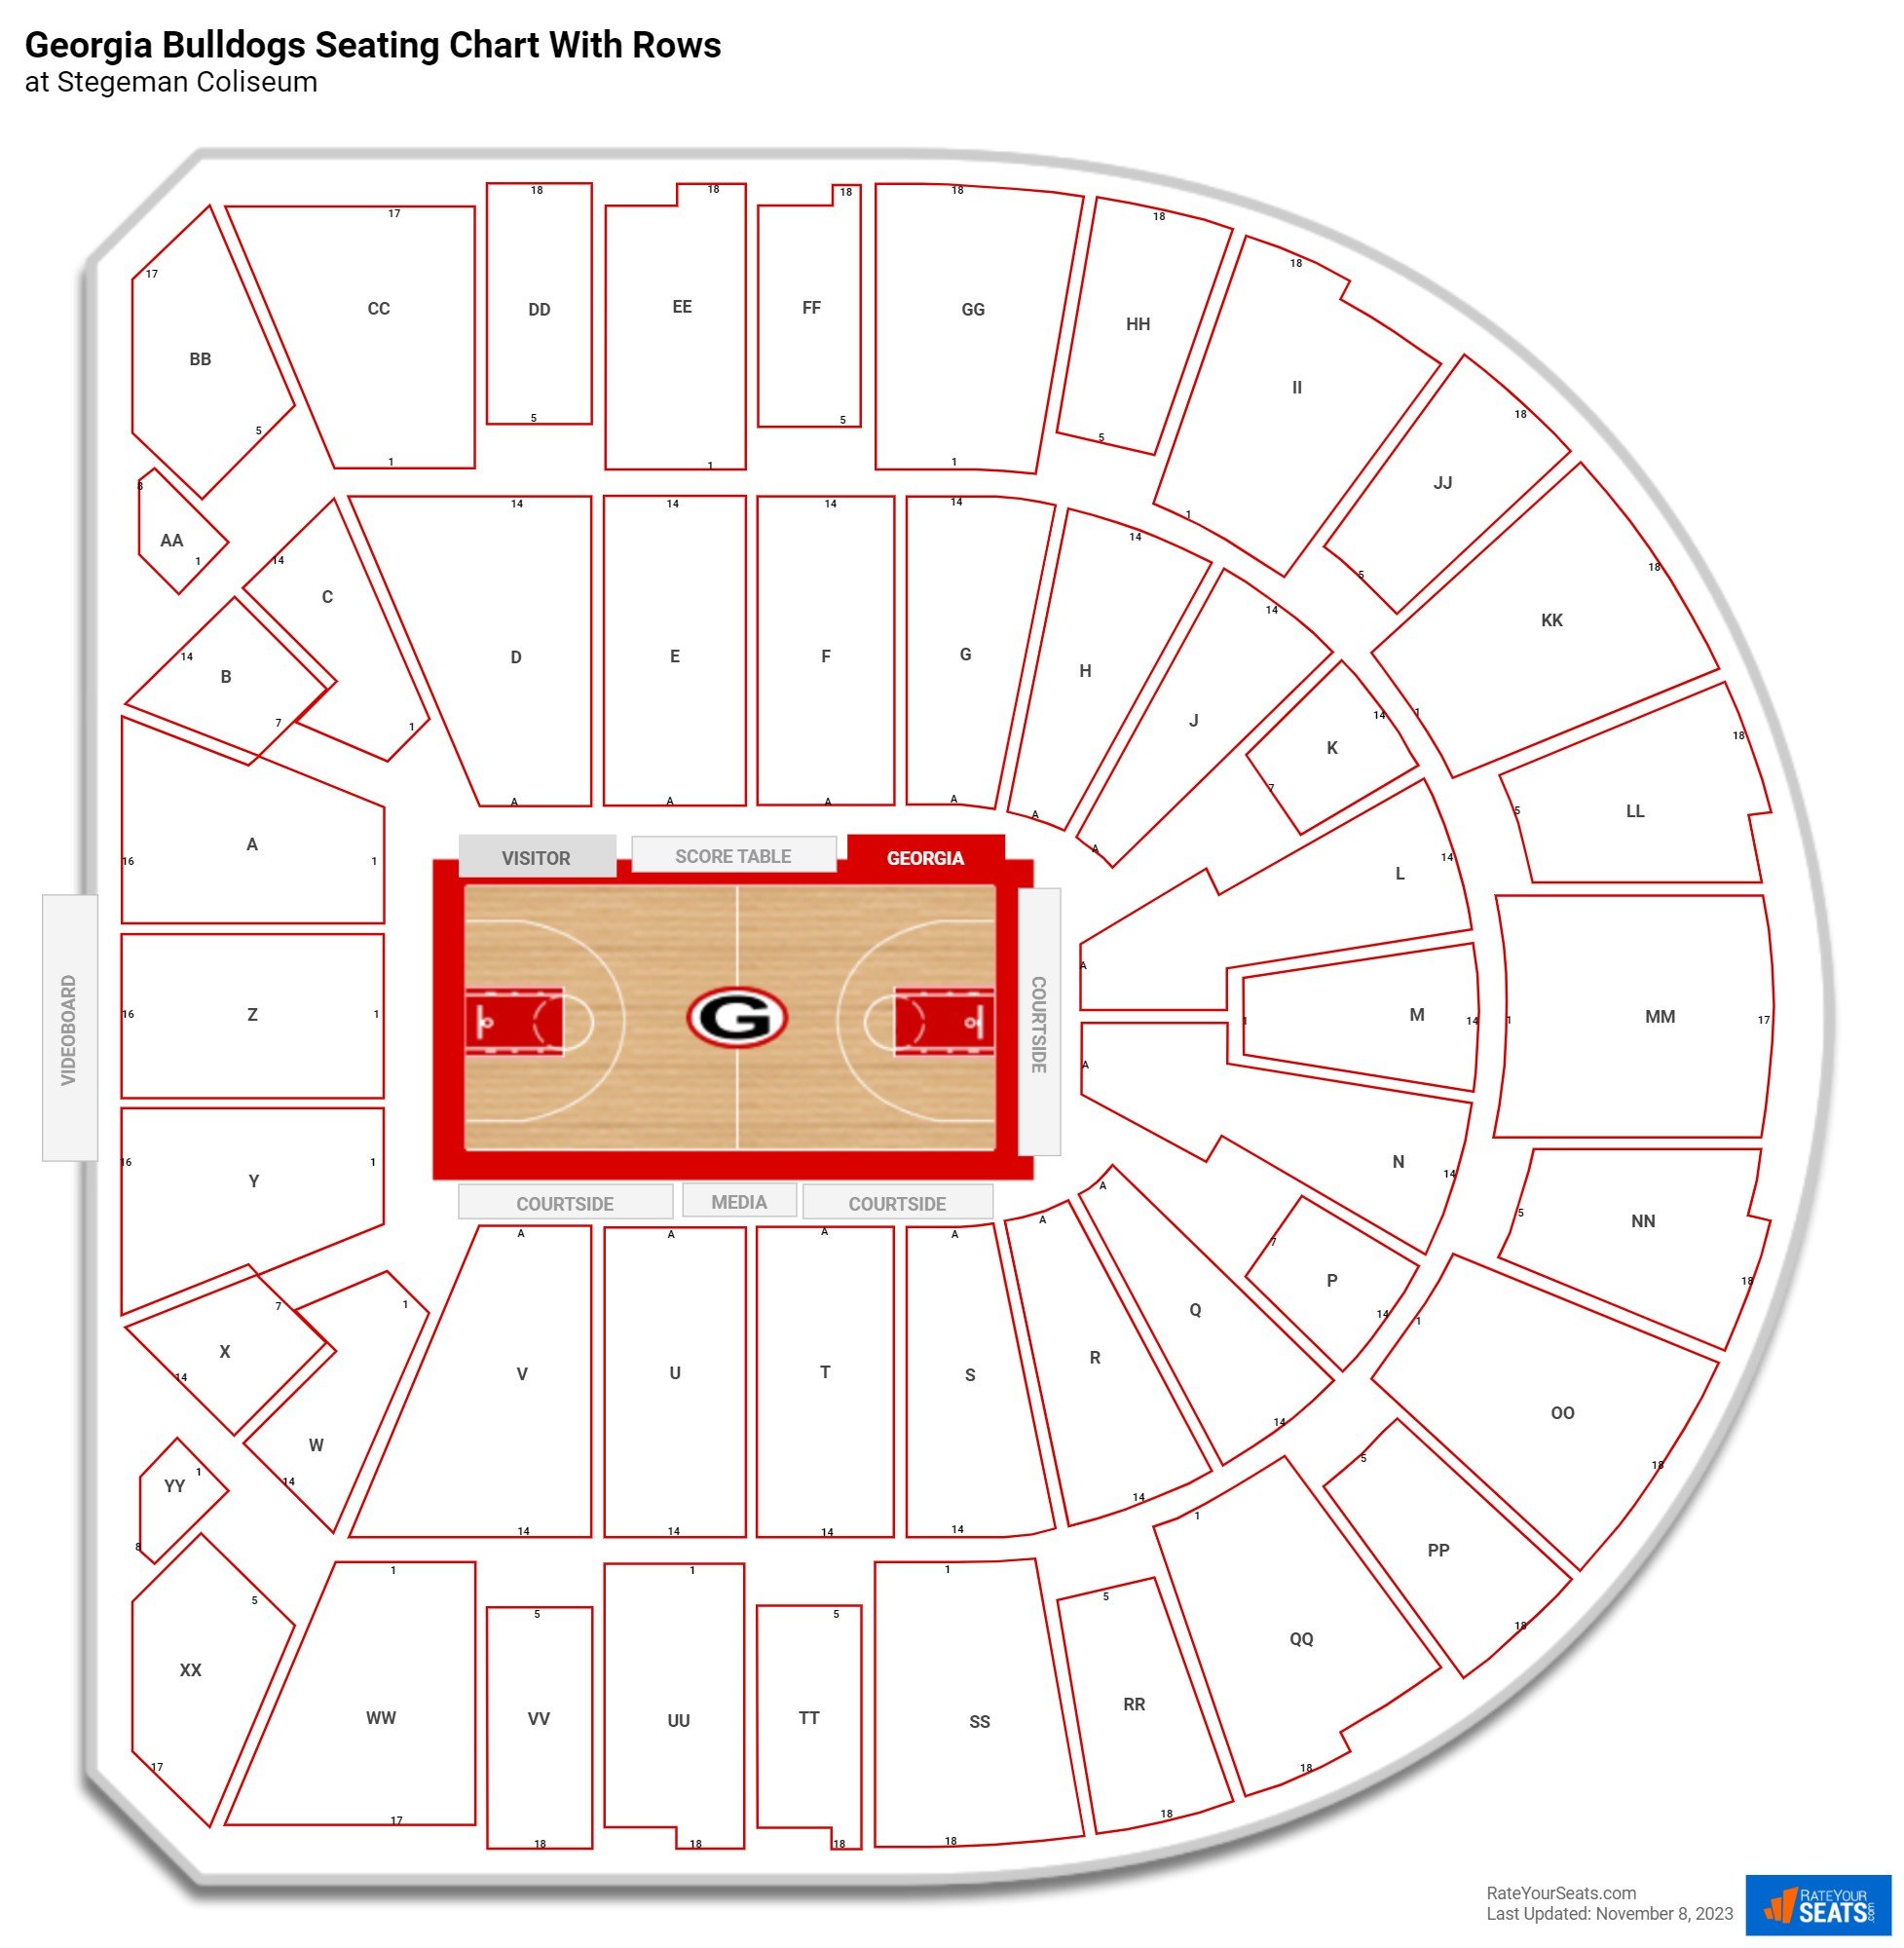 Stegeman Coliseum seating chart with row numbers